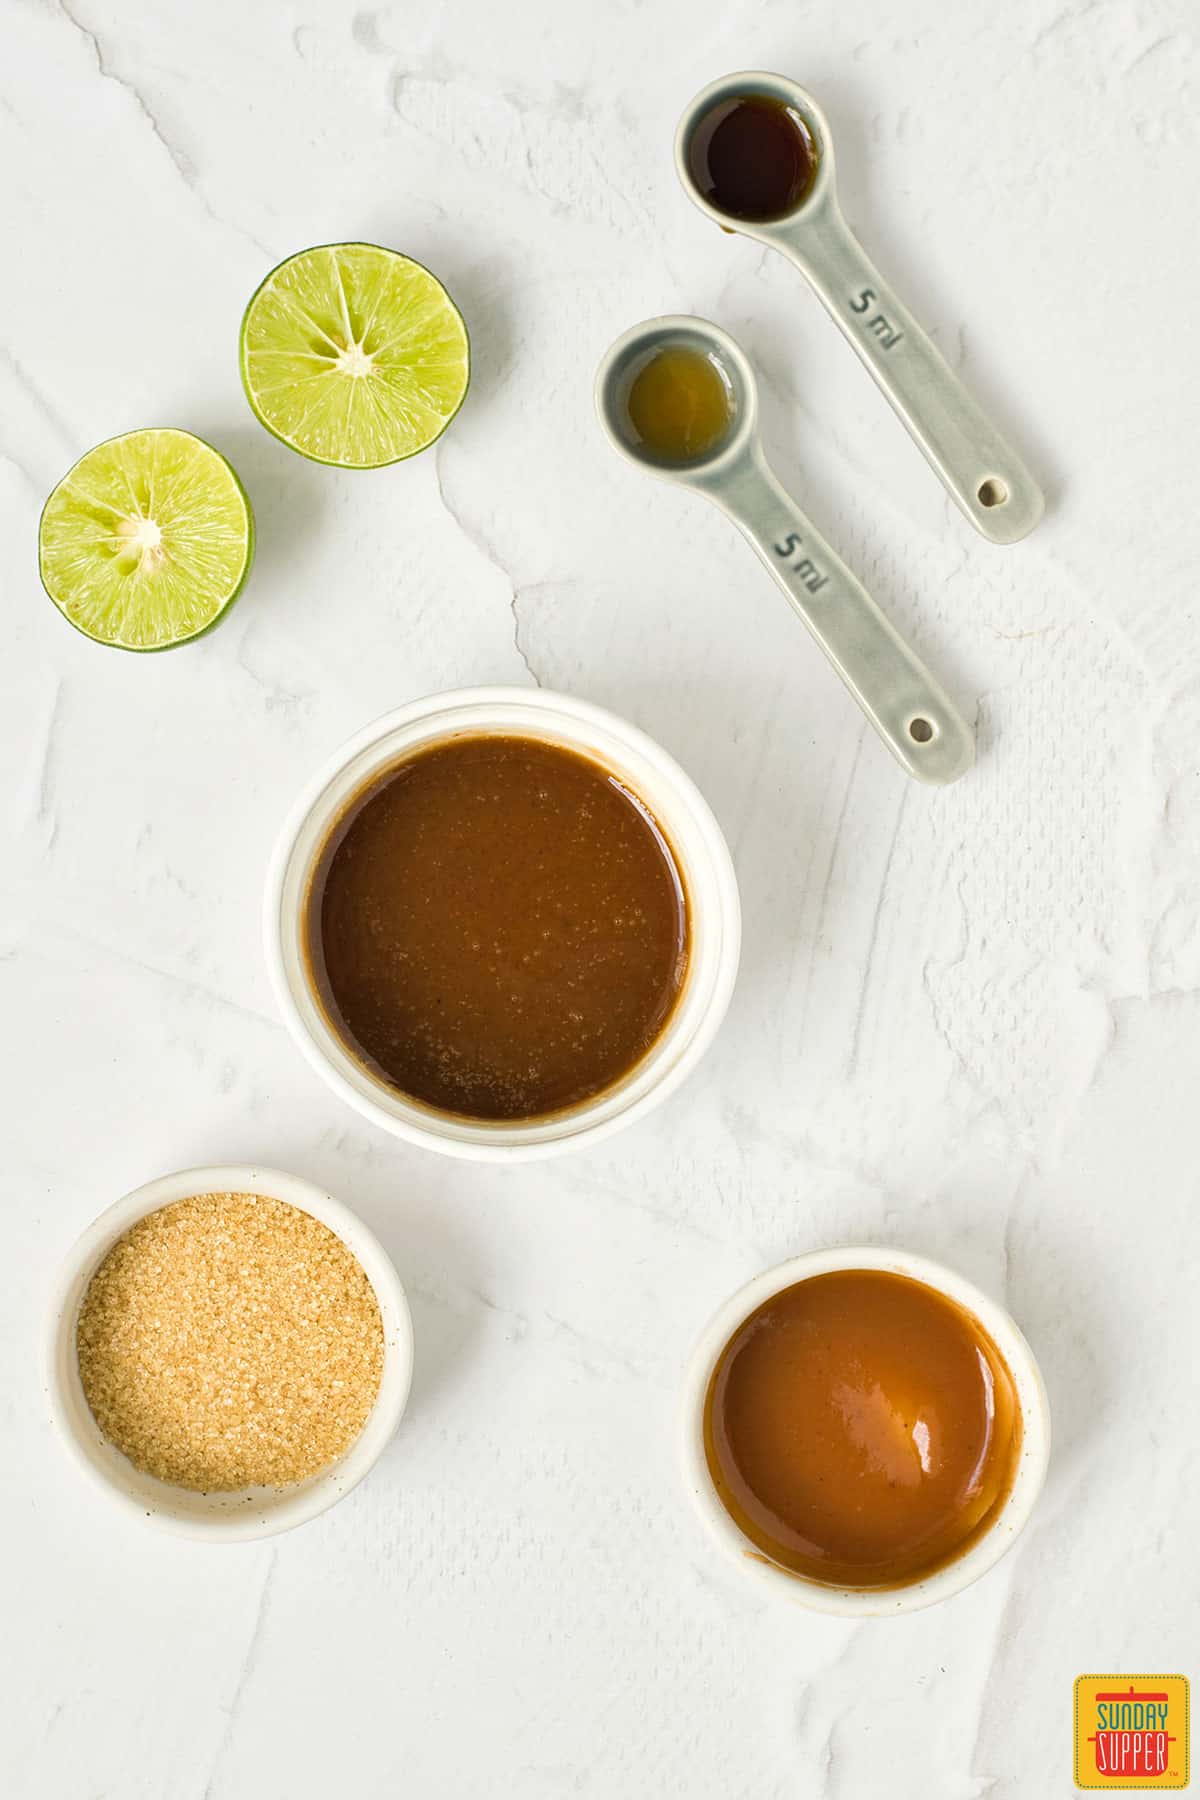 pad thai sauce ingredients in bowls and measuring spoons